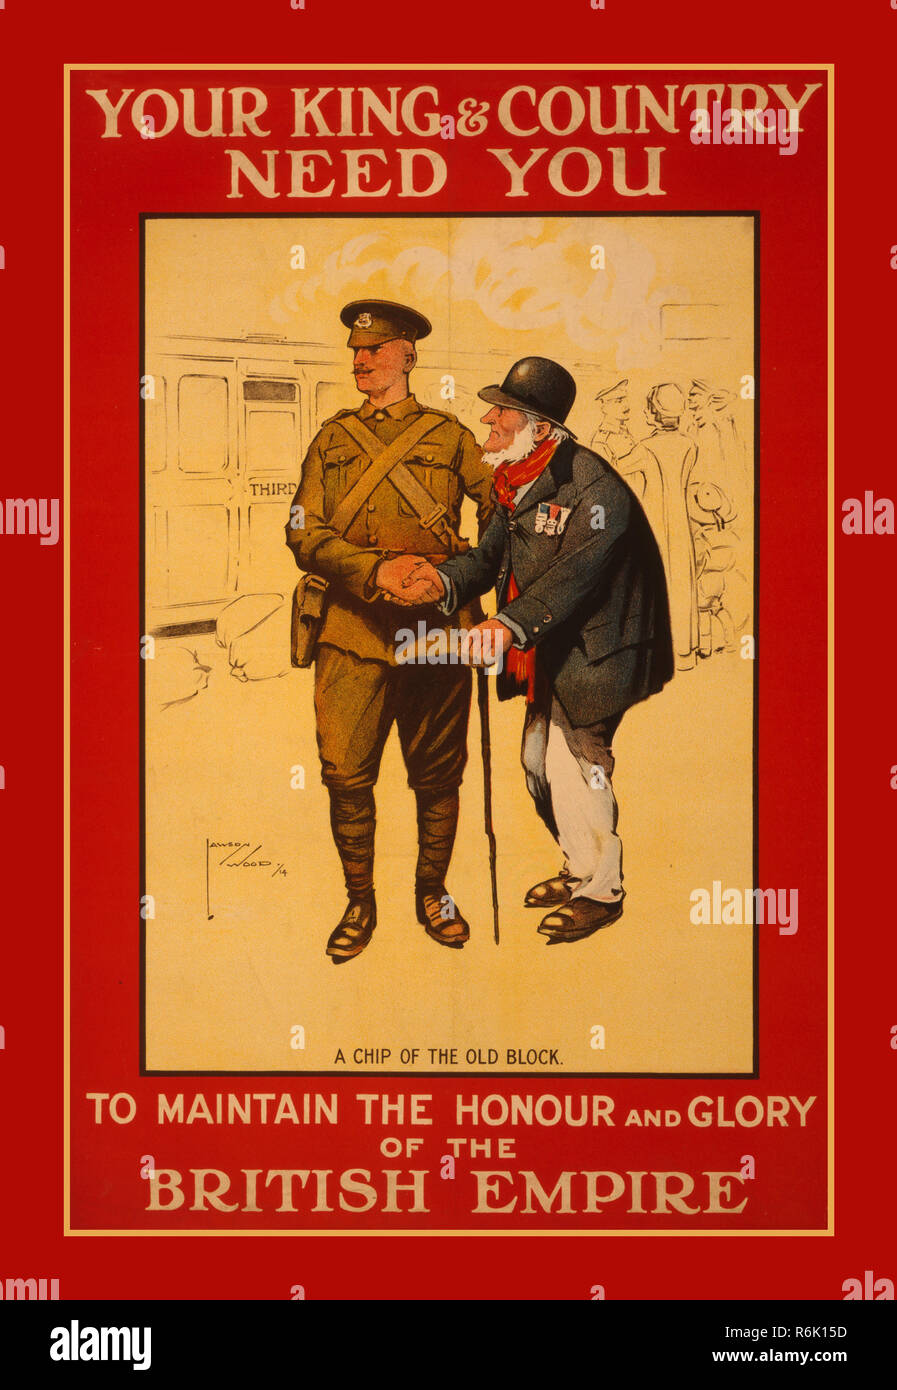 Vintage WW1 British Recruitment poster  ‘YOUR KING & COUNTRY NEED YOU’ .....’to maintain the honour and glory of the British Empire’  Poster showing an old veteran, wearing his decorations, shaking hands with a young soldier 1914 World War 1 UK Stock Photo